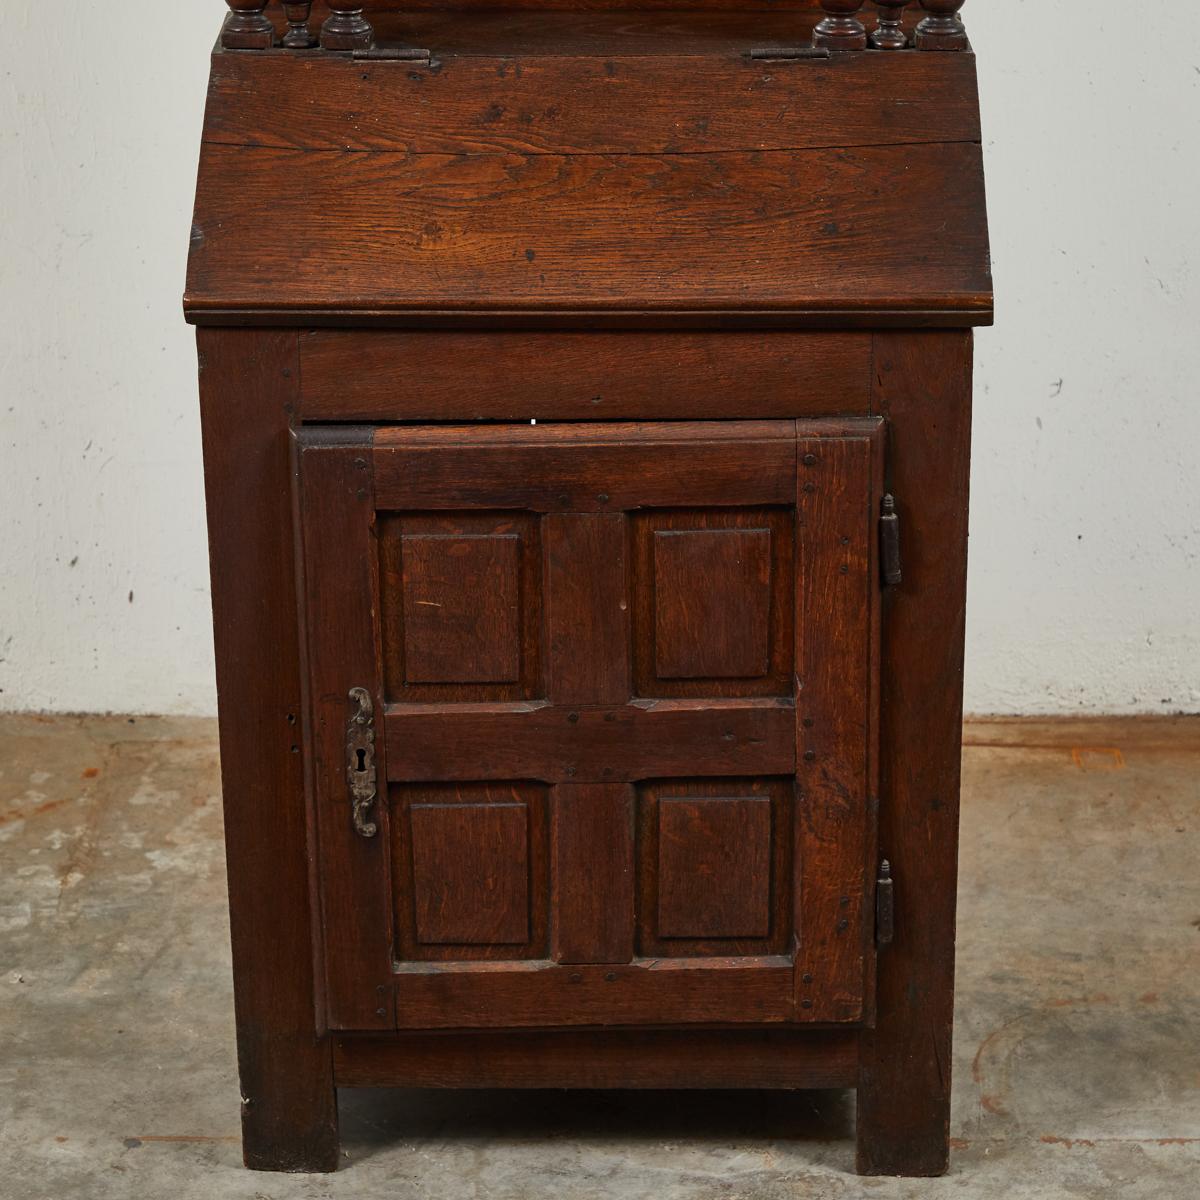 Early 18th Century French Petite Secretaire or Bureau with Projecting Cabinet In Good Condition For Sale In Los Angeles, CA